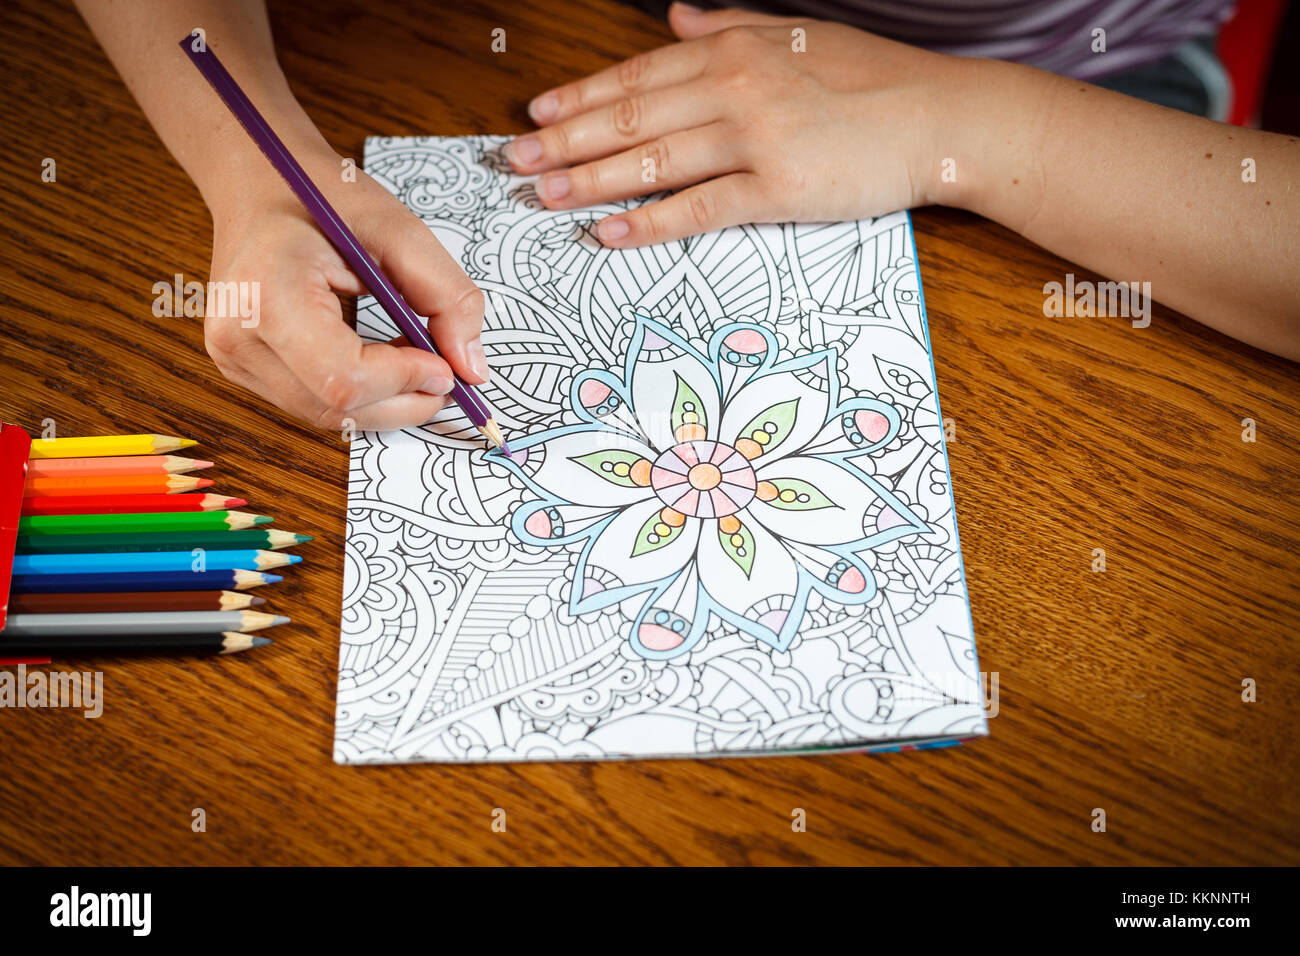 Adult coloring book Stock Photo